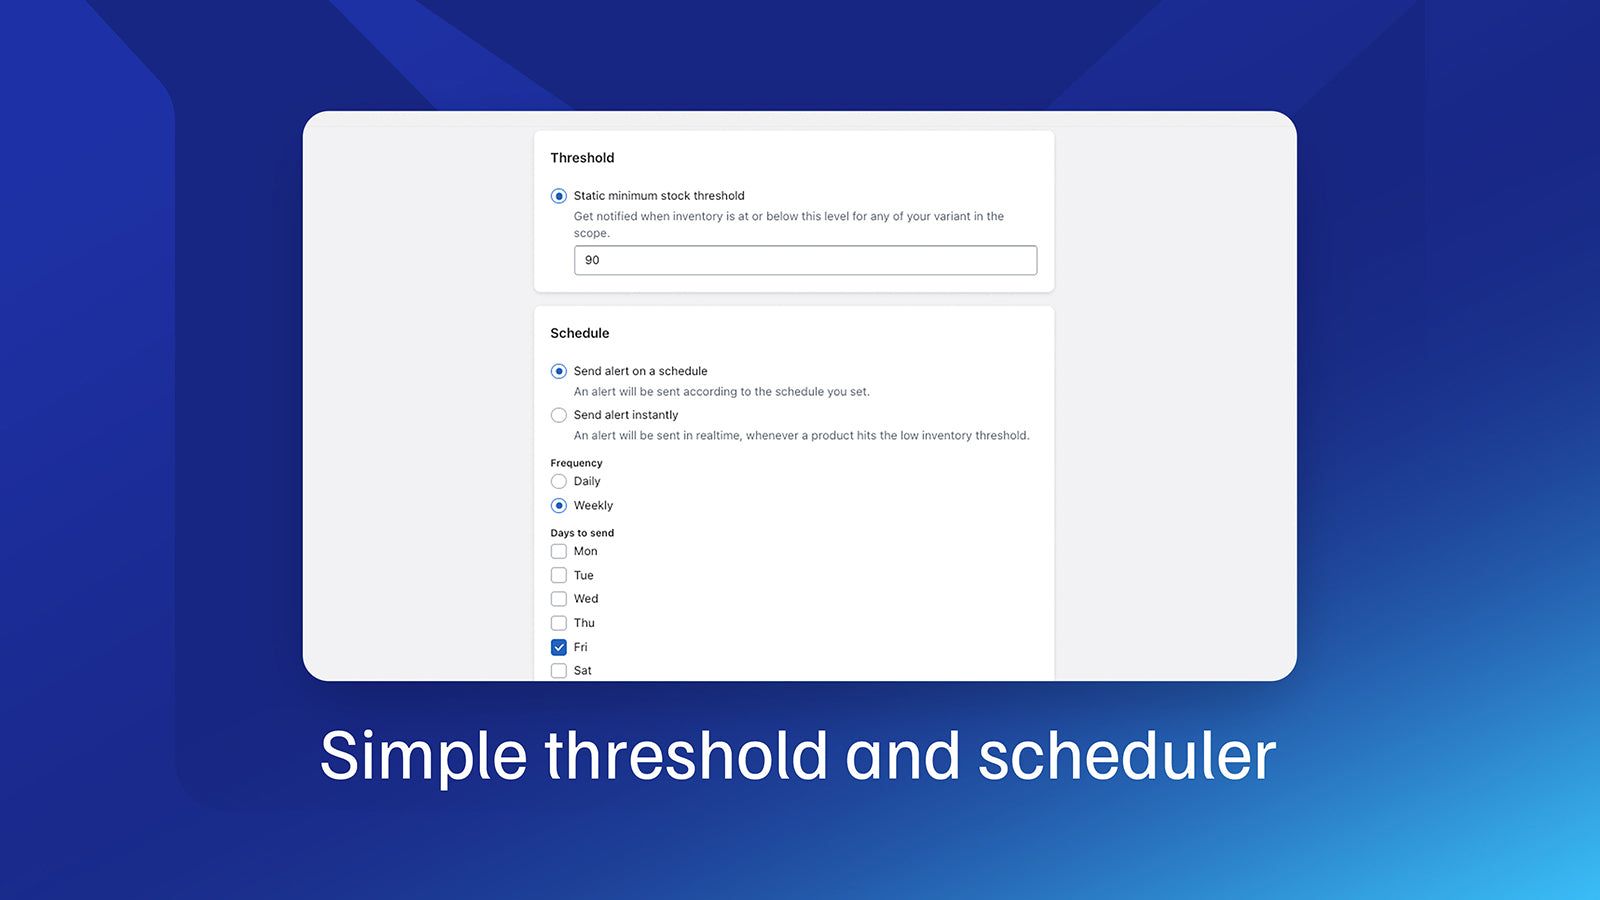 Simple threshold and scheduler